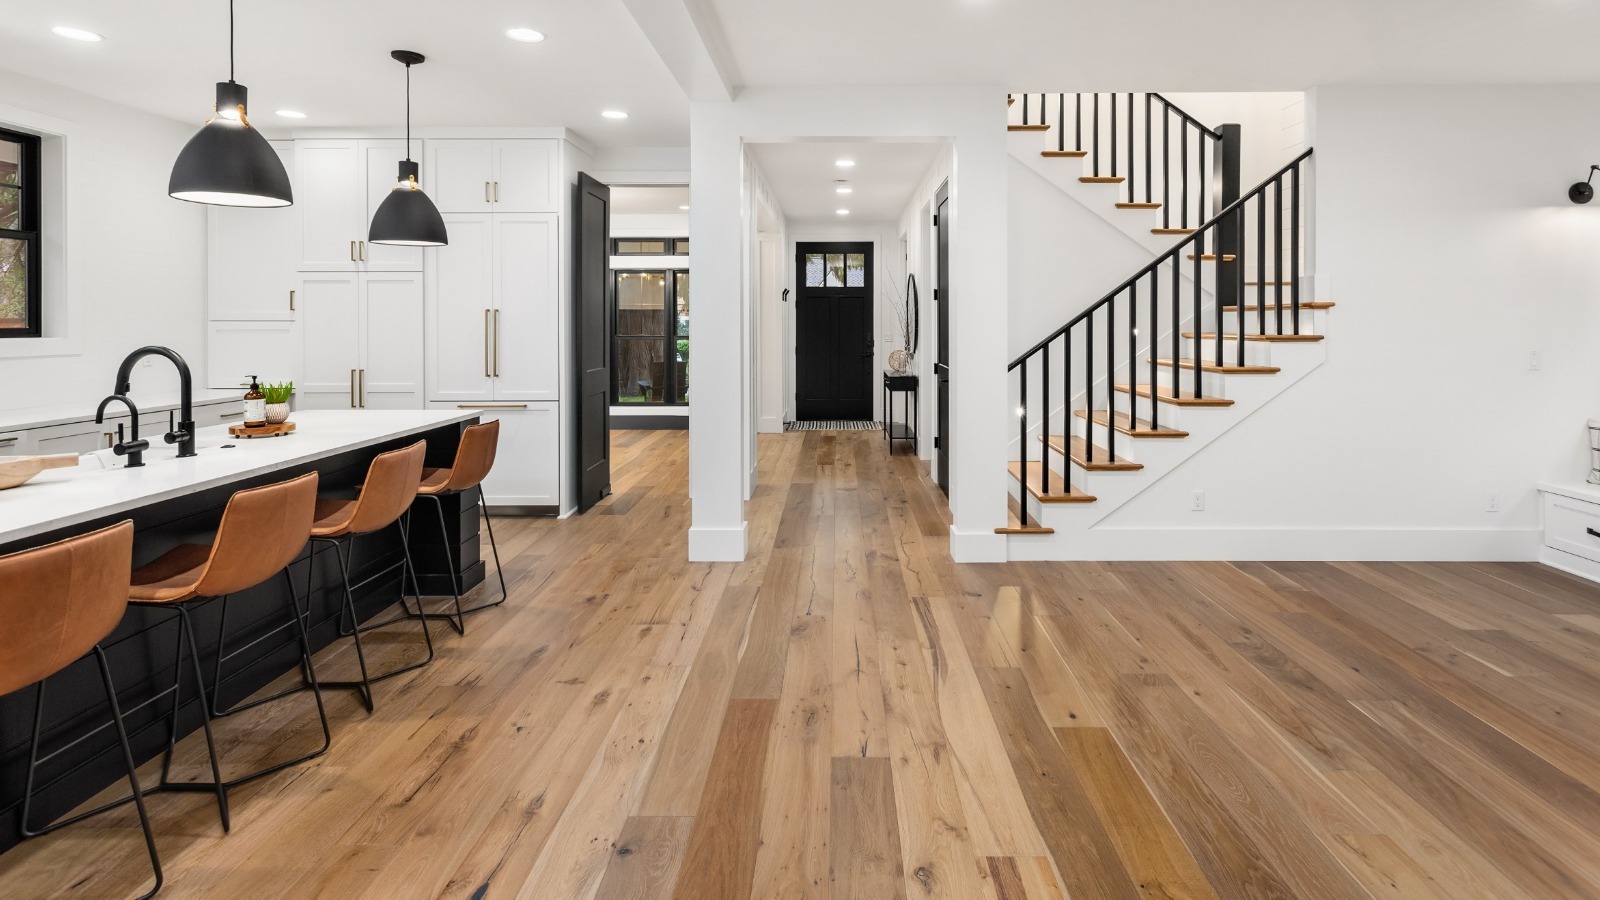 https://www.housedigest.com/img/gallery/how-much-does-it-cost-to-put-in-wood-flooring/l-intro-1646756472.jpg